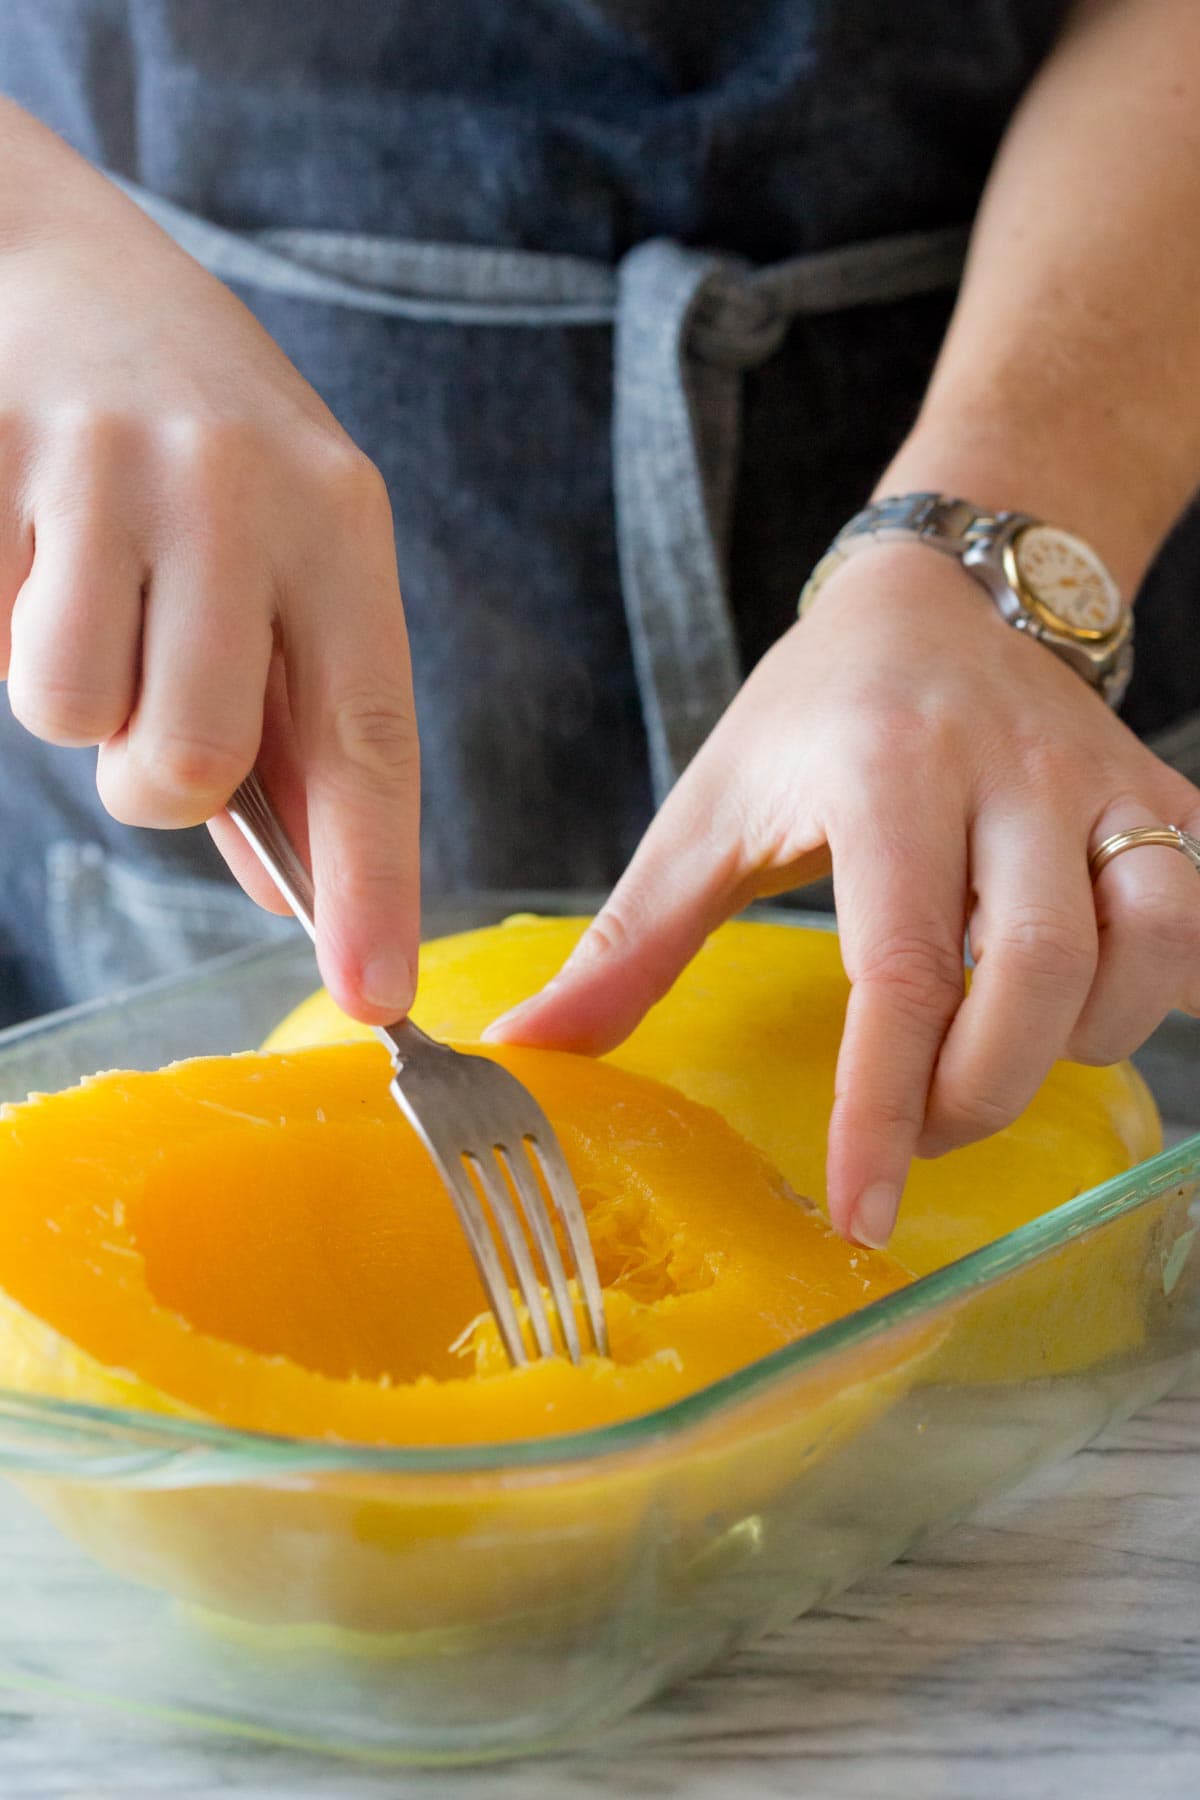 testing how tender the squash is with a fork